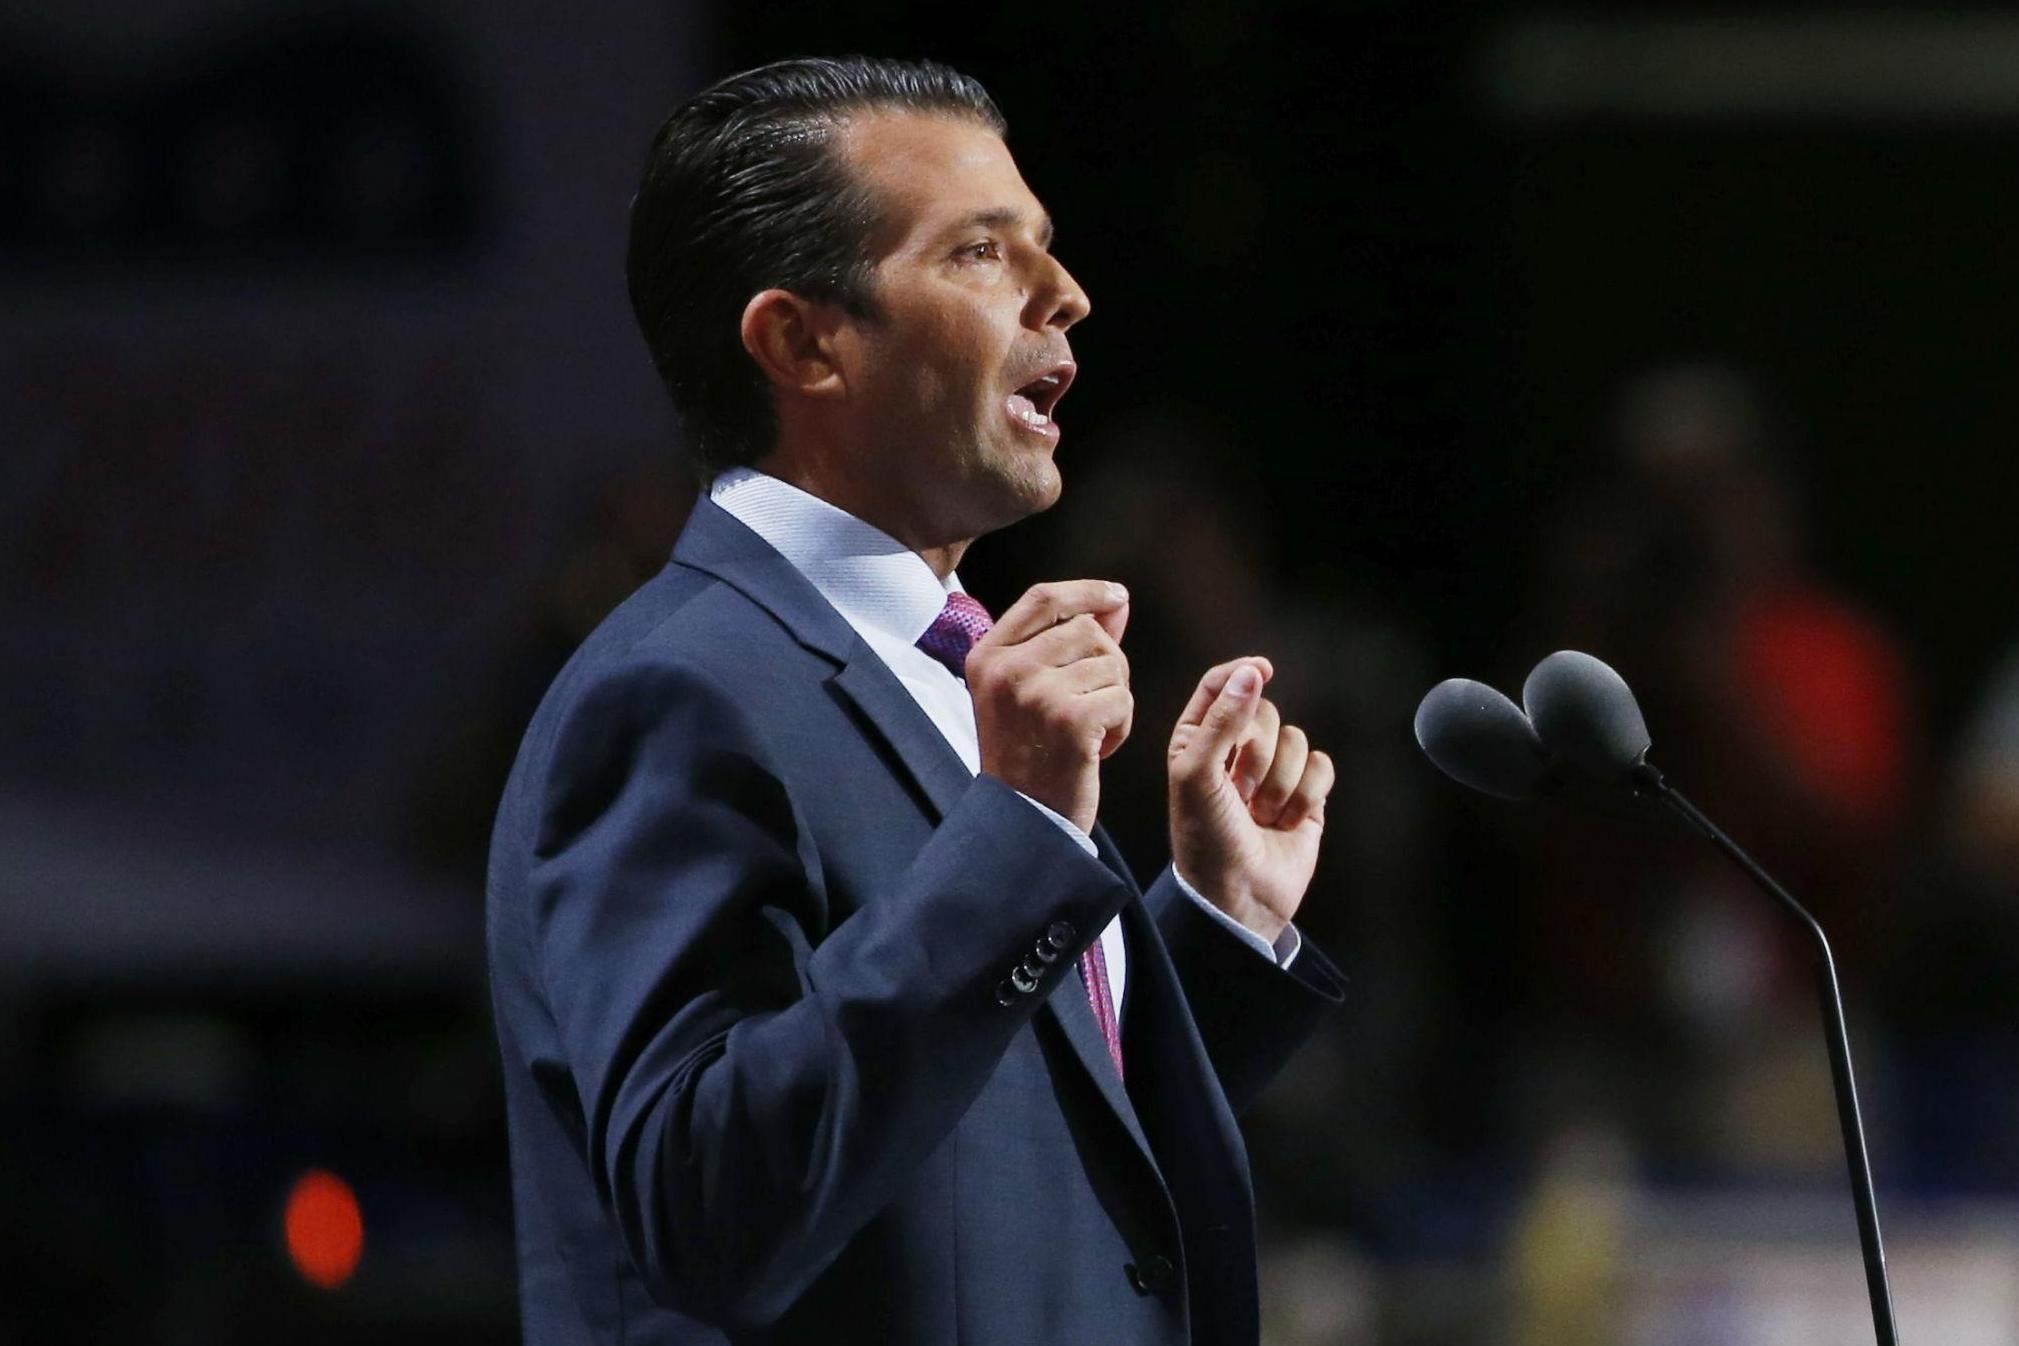 Donald Trump Jnr warned that by taking in Syrian refugees the US risks admitting terrorists